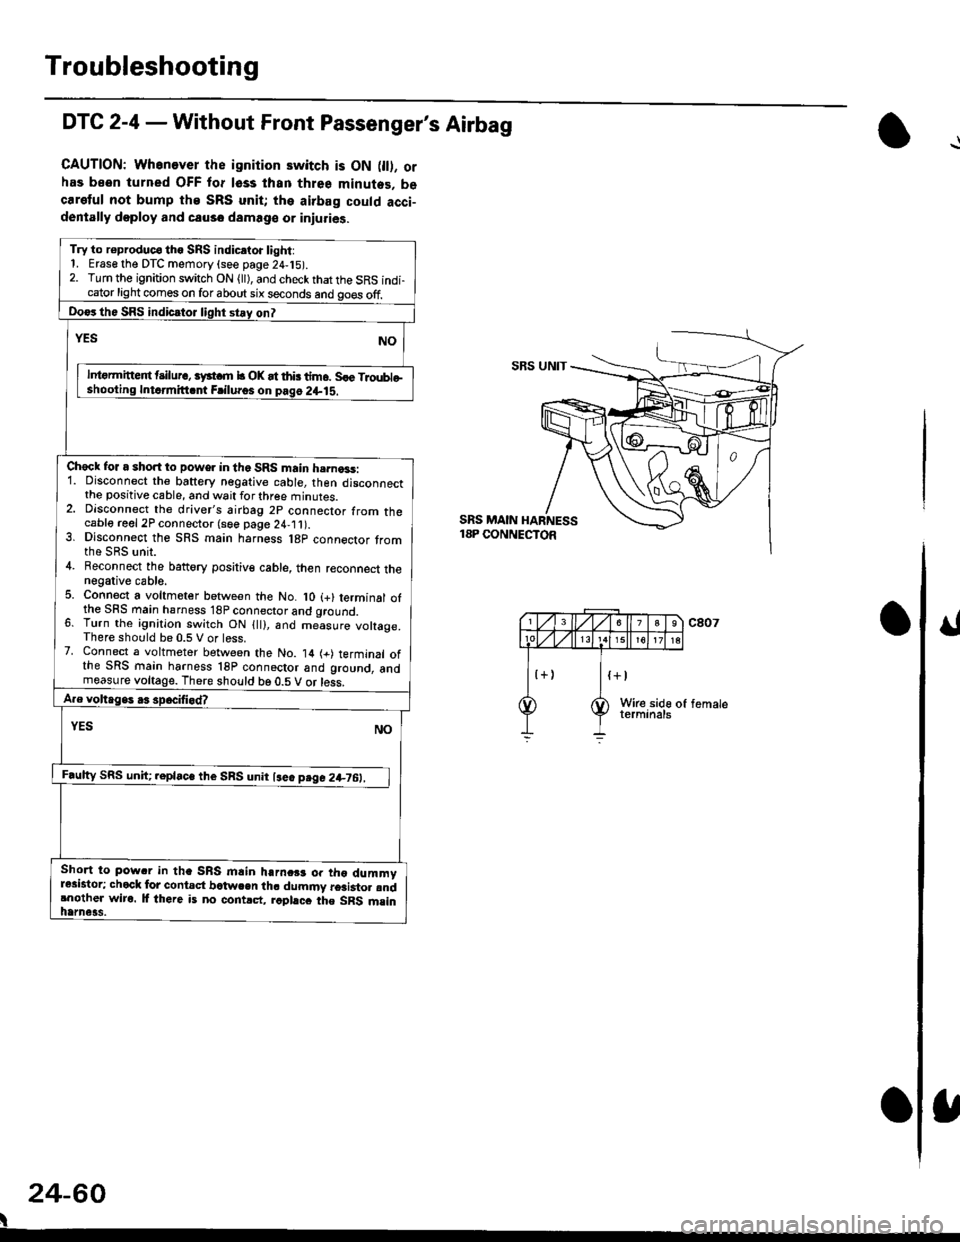 HONDA CIVIC 1996 6.G User Guide Troubleshooting
DTC 2-4 - Without Front Passengers Airbag
CAUTION: Whenever the ignition switch is ON 0l). orhas been turned OFF for lsss lhan three minutes. becaretul not bump the SRS unit; the airb